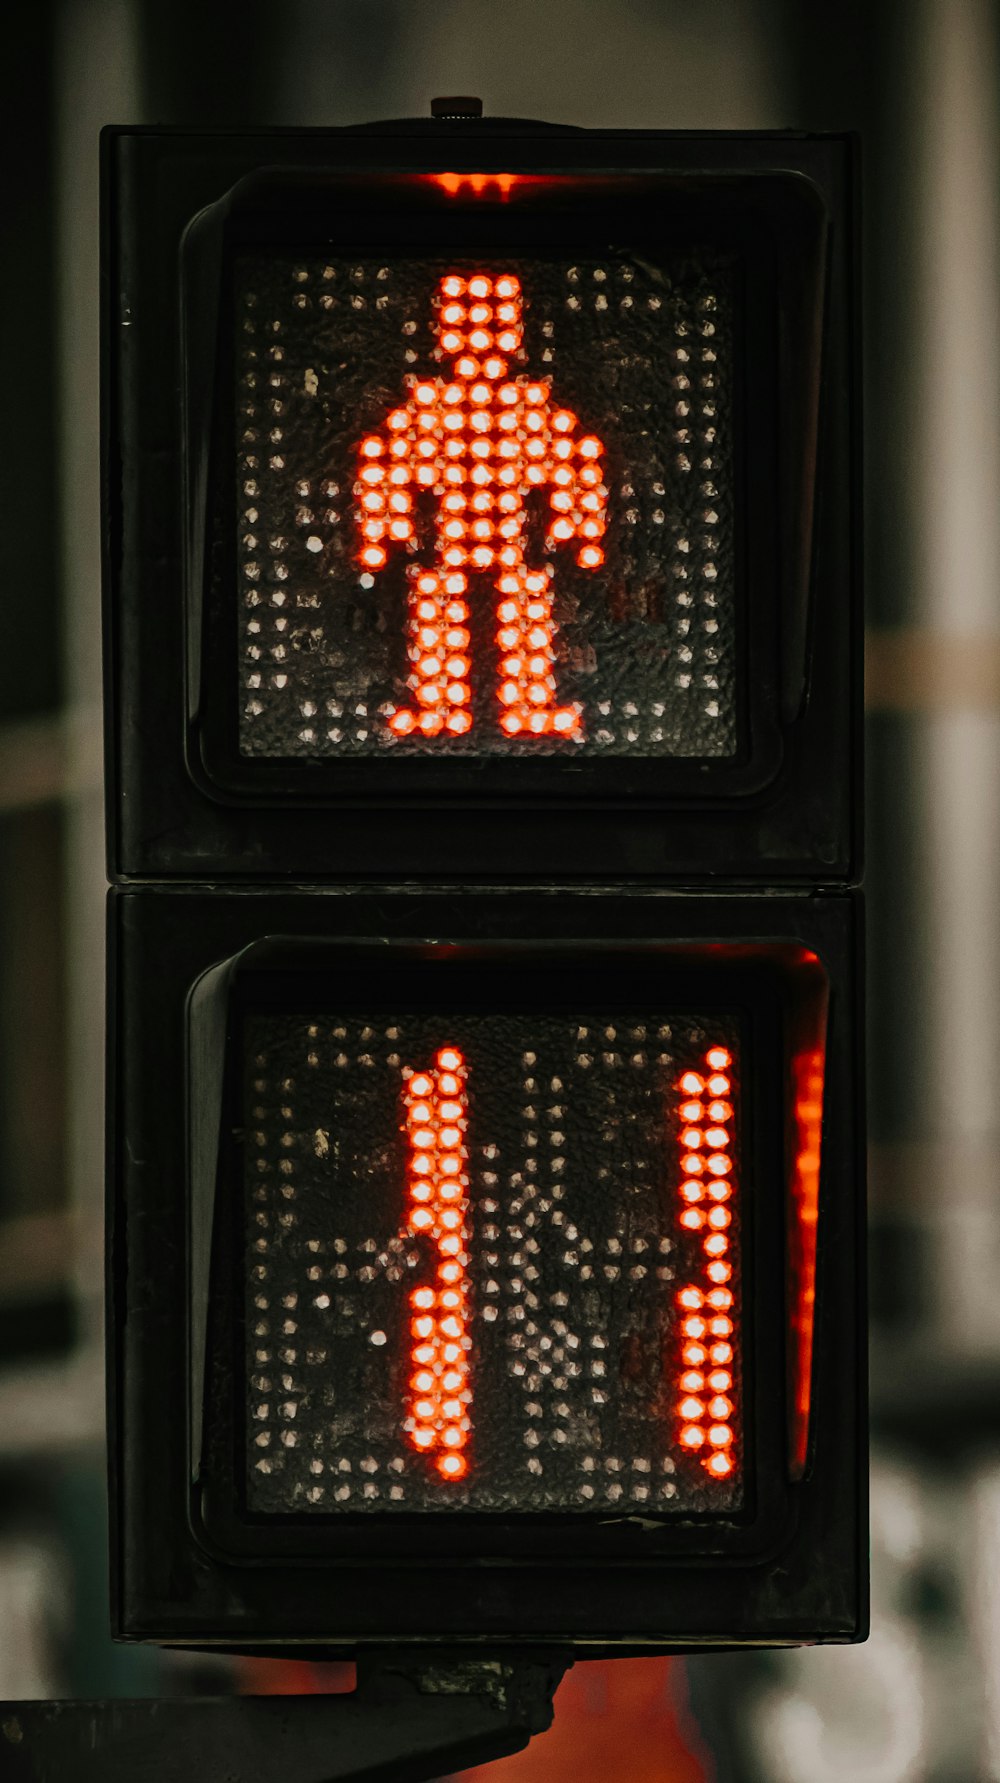 black and red traffic light